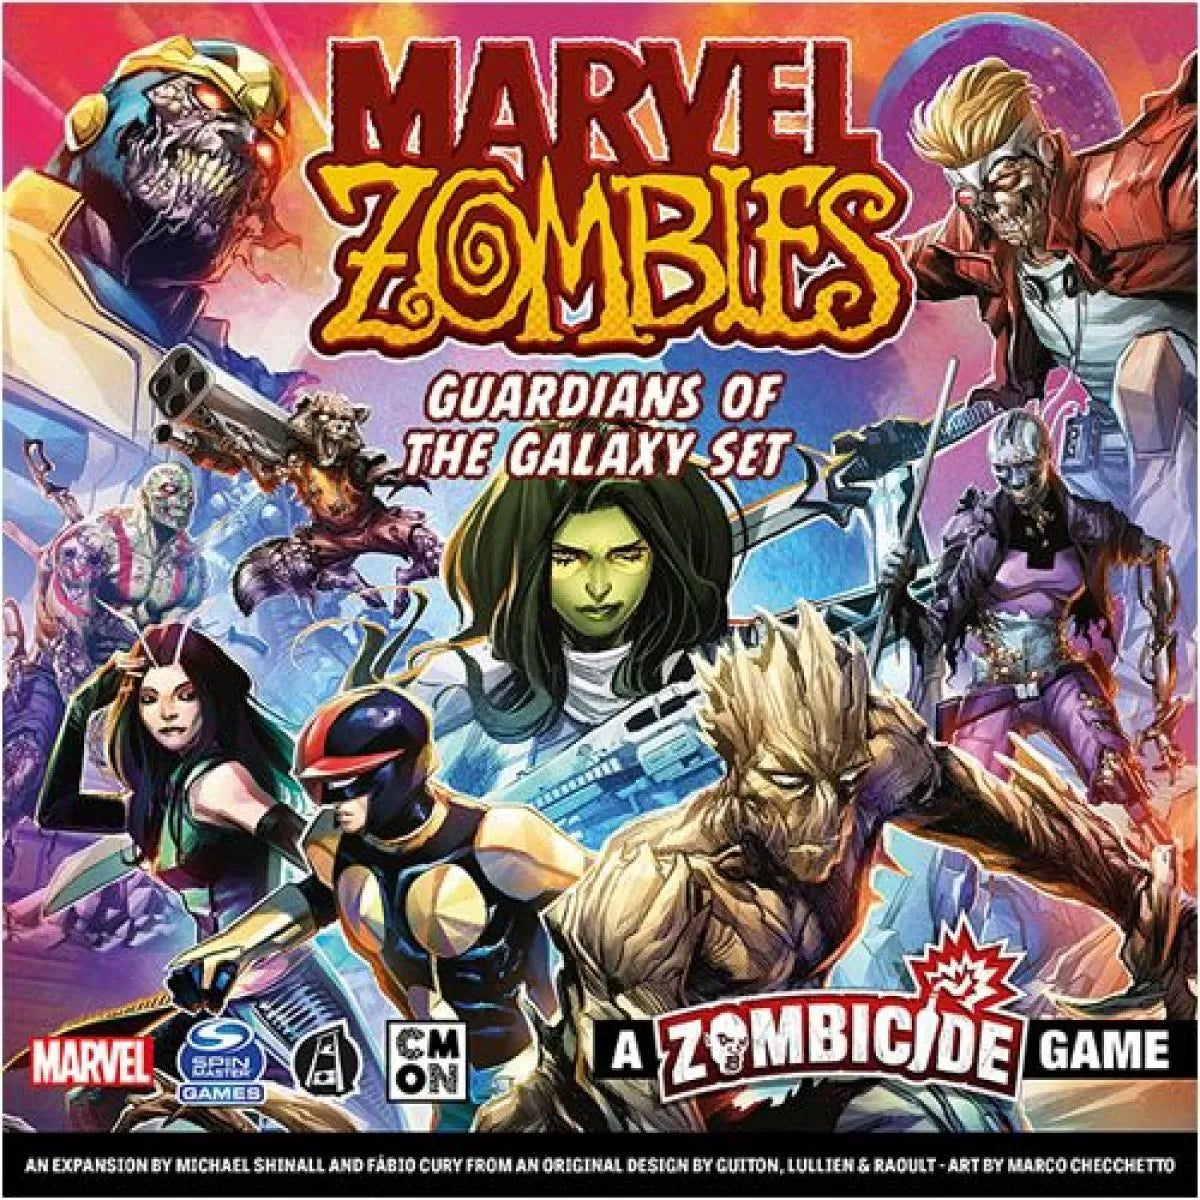 Marvel Zombies A Zombicide Game Guardians of the Galaxy